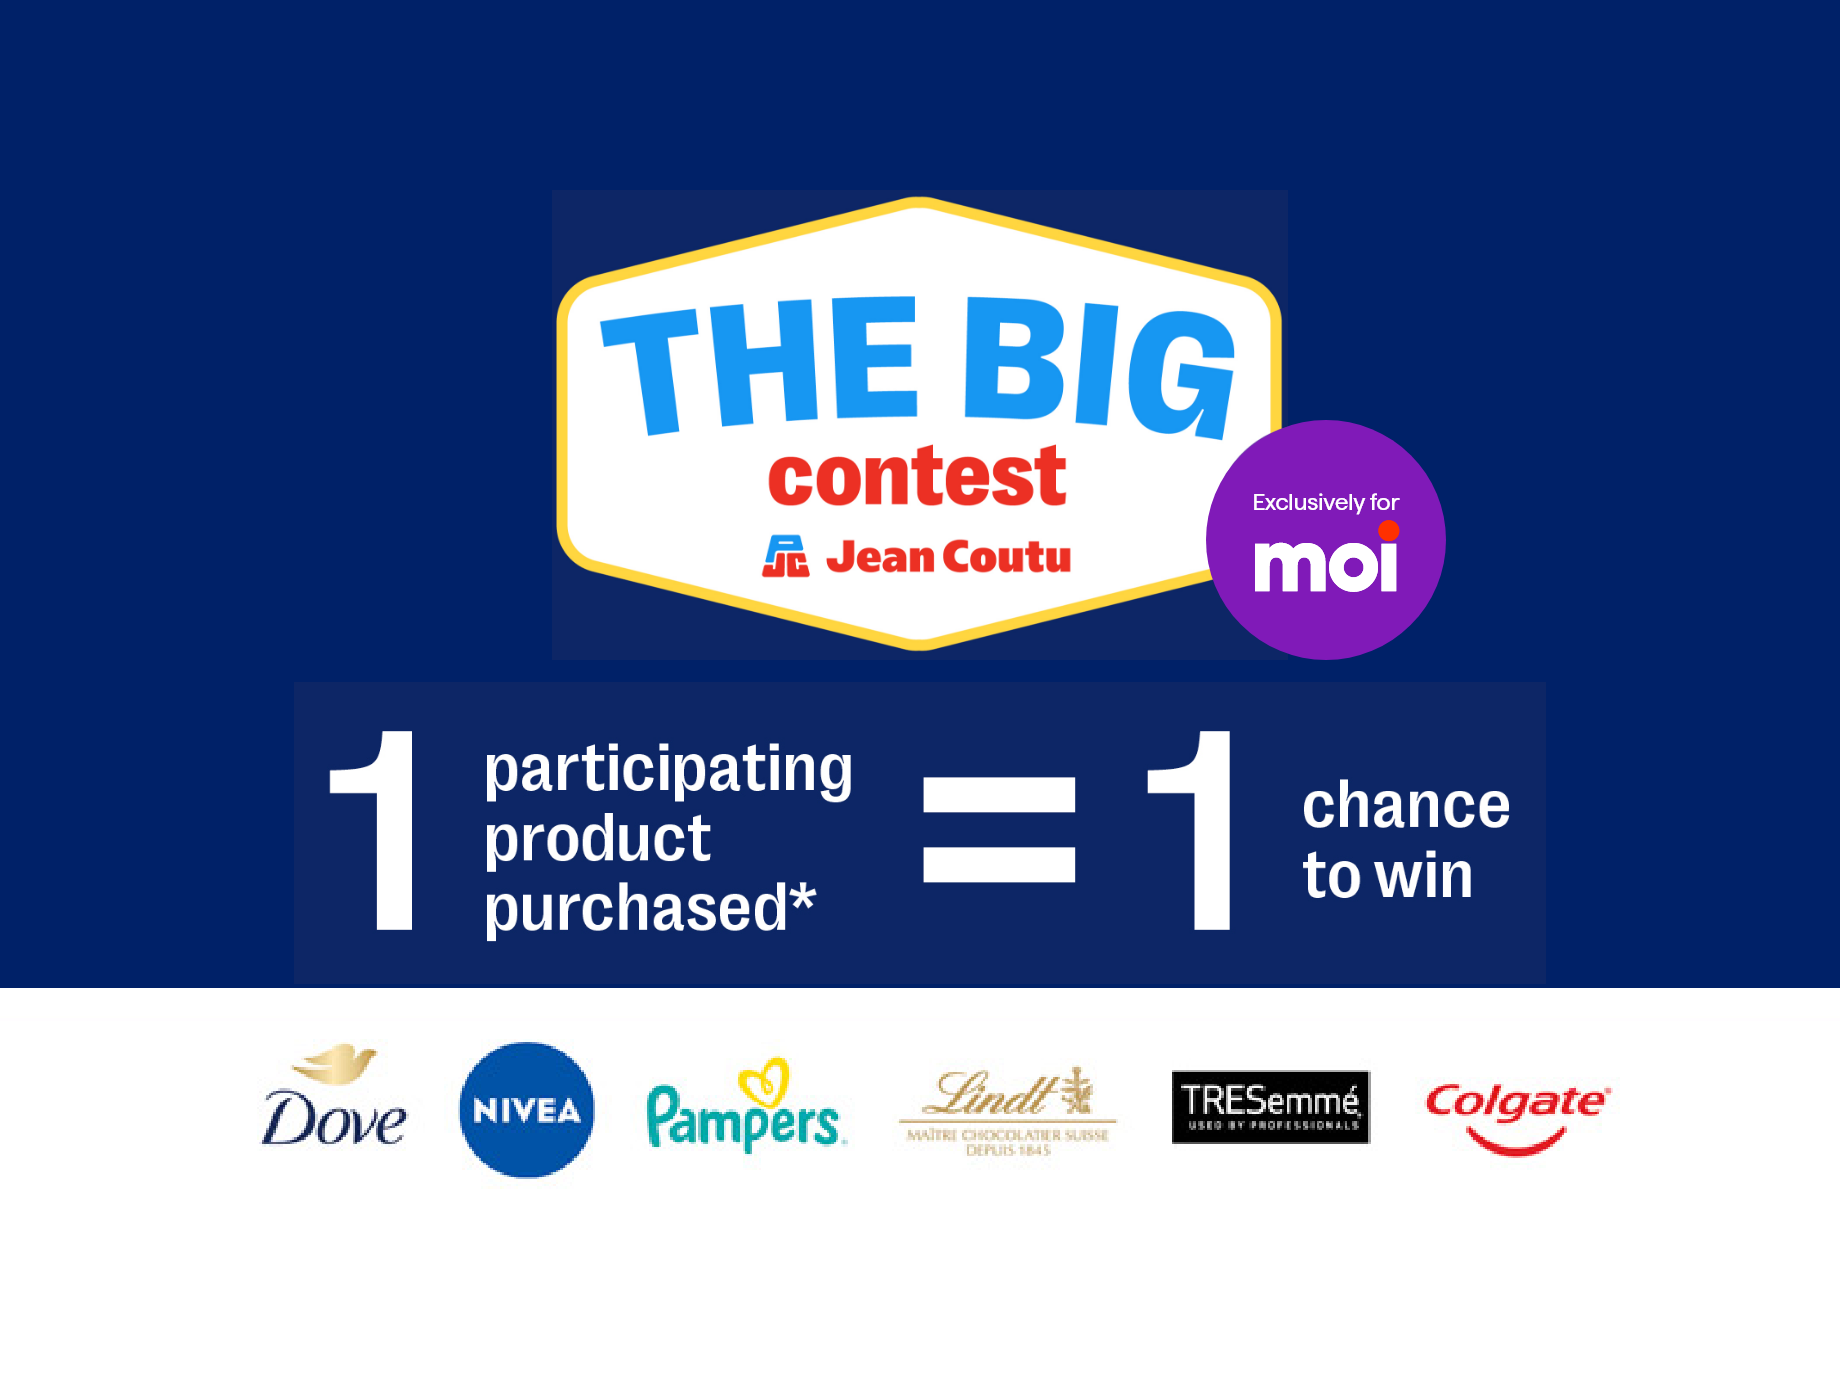 The Big Contest - 1 participating product purchased* = 1 chance to win